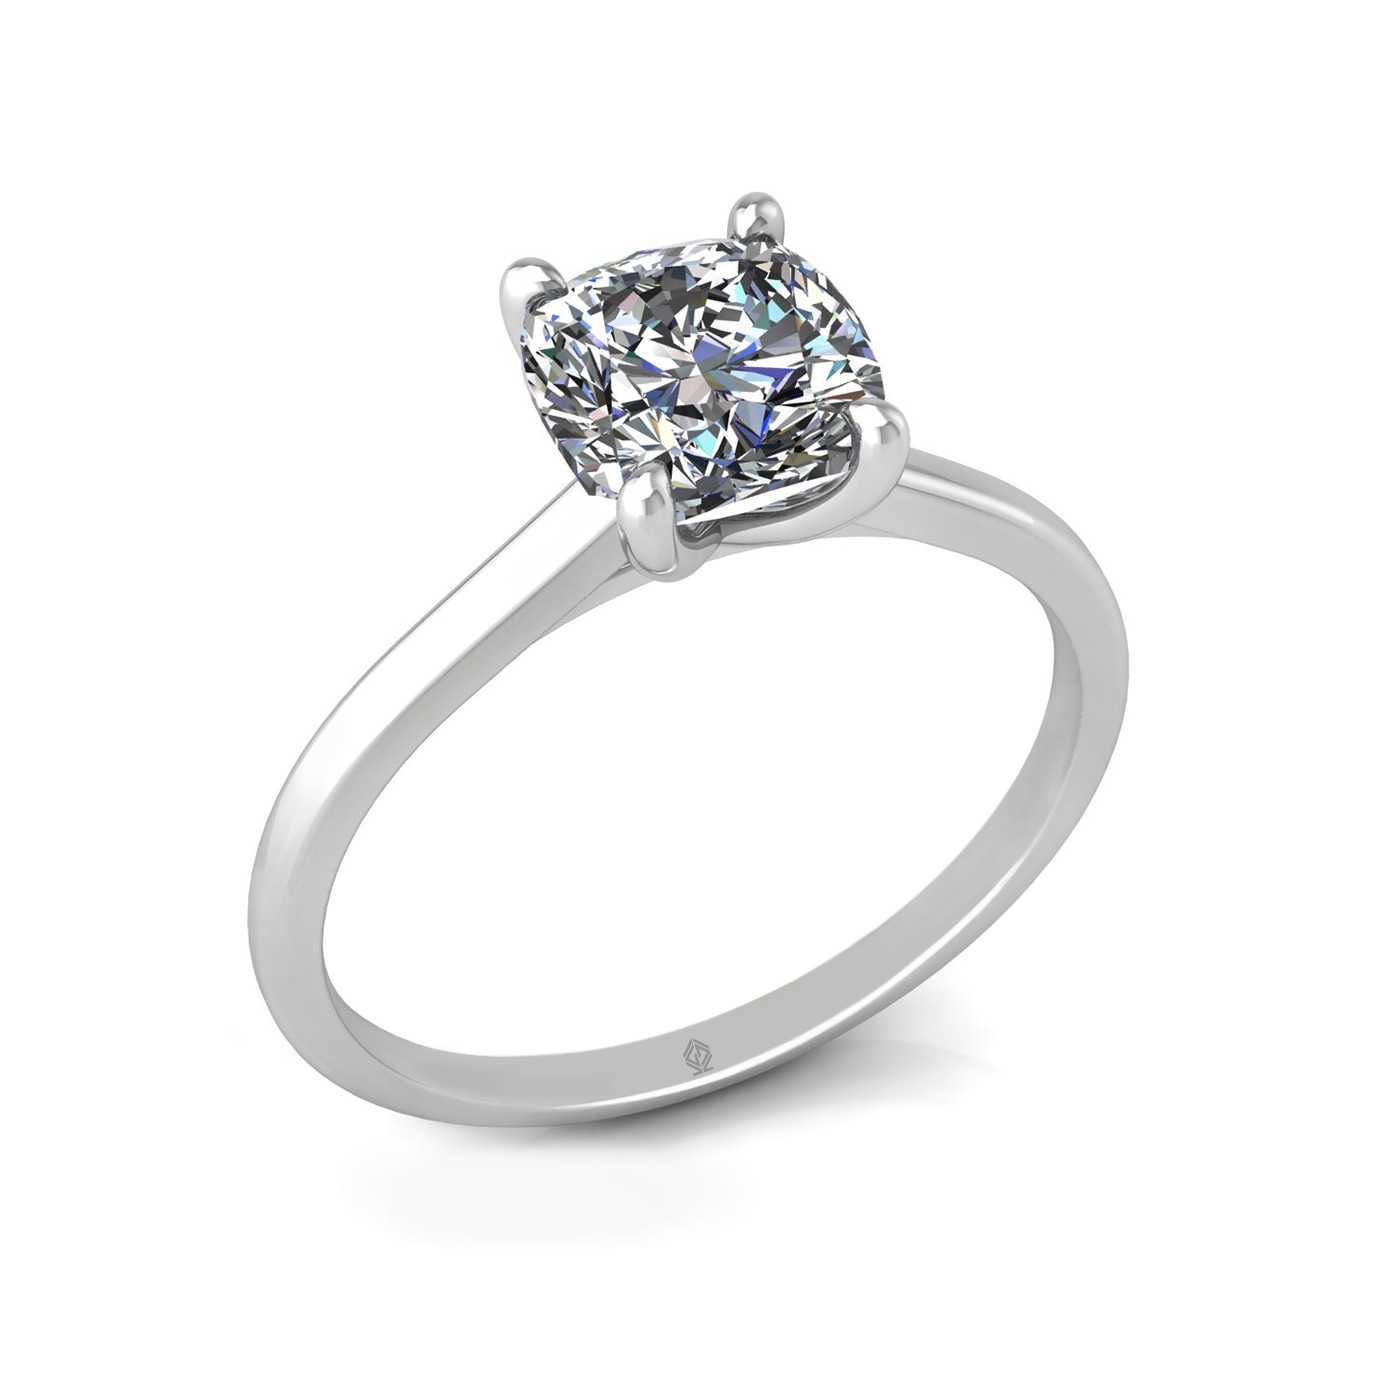 18k white gold 1.5ct 4 prongs solitaire cushion cut diamond engagement ring with whisper thin band